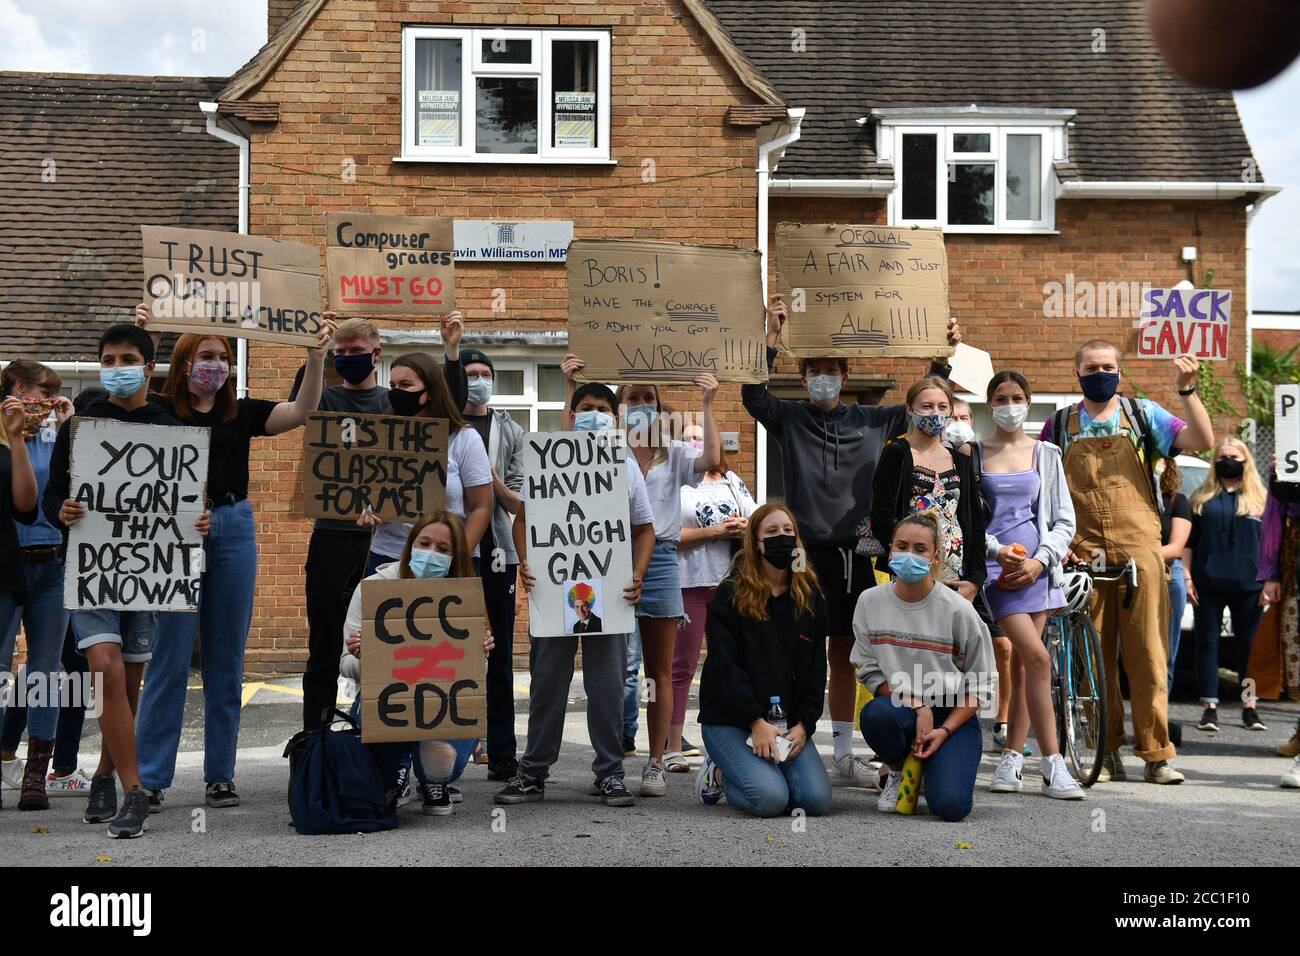 Students from Codsall Community High School protest outside the constituency office of their local MP, Education Secretary Gavin Williamson, as they protest over the continuing issues of last week's A level results which saw some candidates receive lower-than-expected grades after their exams were cancelled as a result of coronavirus. Stock Photo